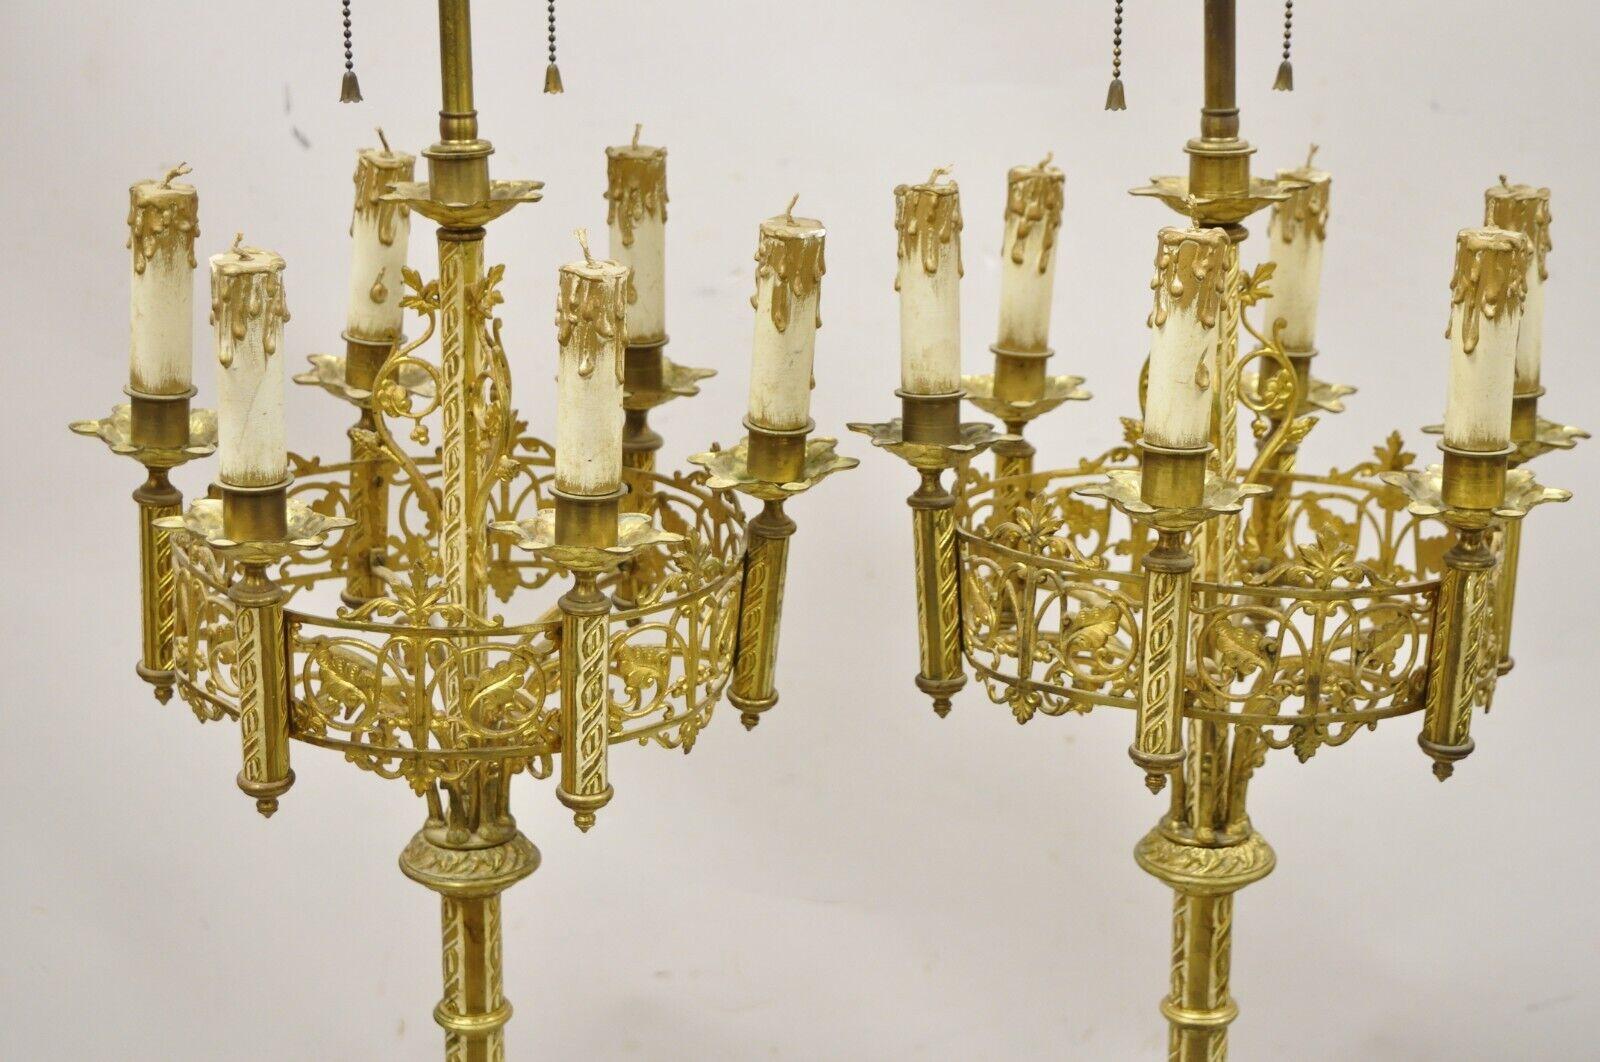 20th Century Antique Gothic Revival Gold Bronze Figural Candelabra Table Lamps, a Pair For Sale